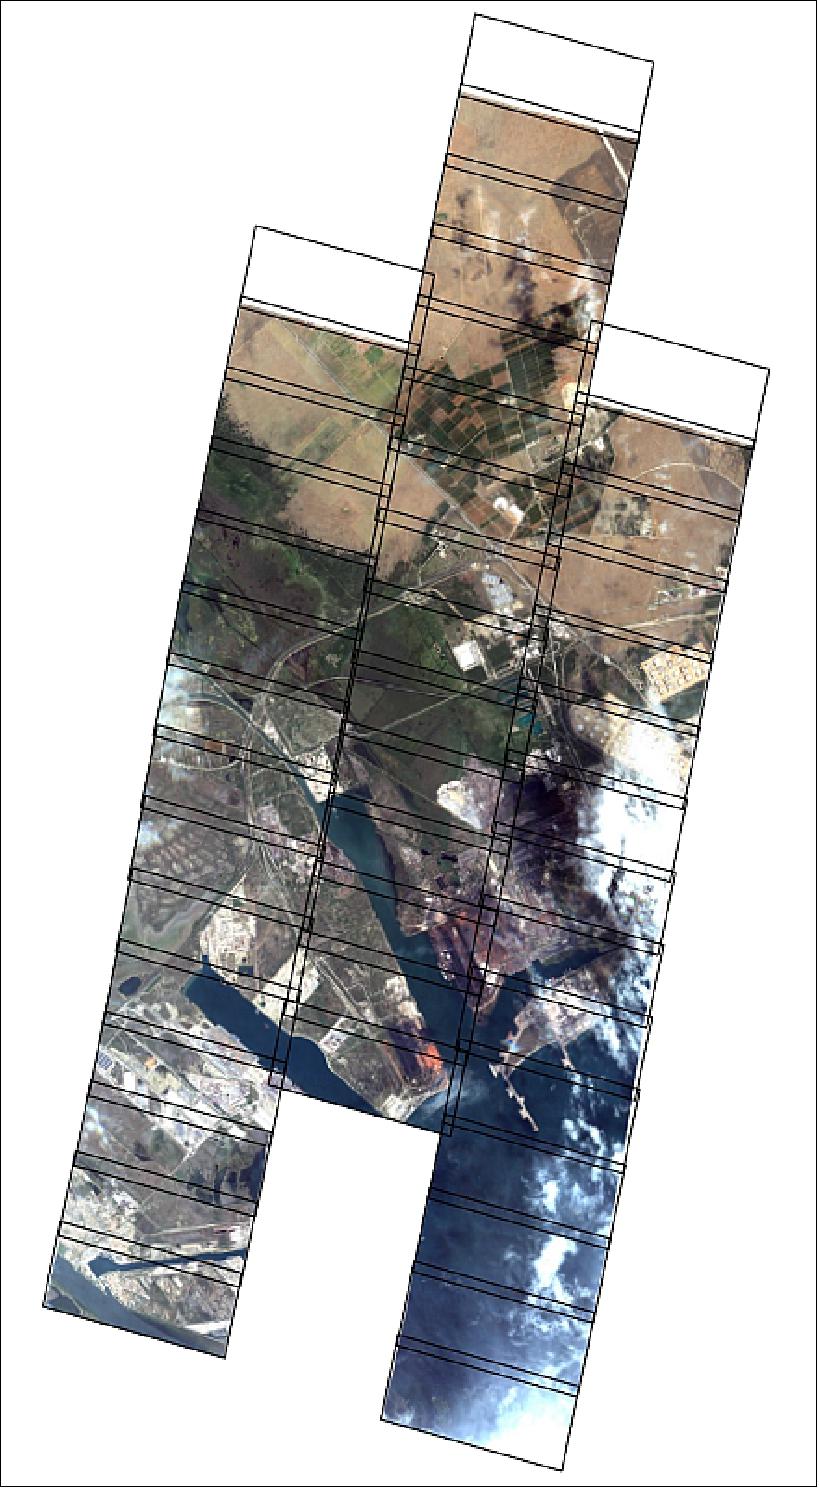 Figure 37: Fos sur Mer industrial zone as seen by SkySat-1. The bounding boxes show the individual frames after coregistration and multi-image fusion (image credit: Skybox, DLR)